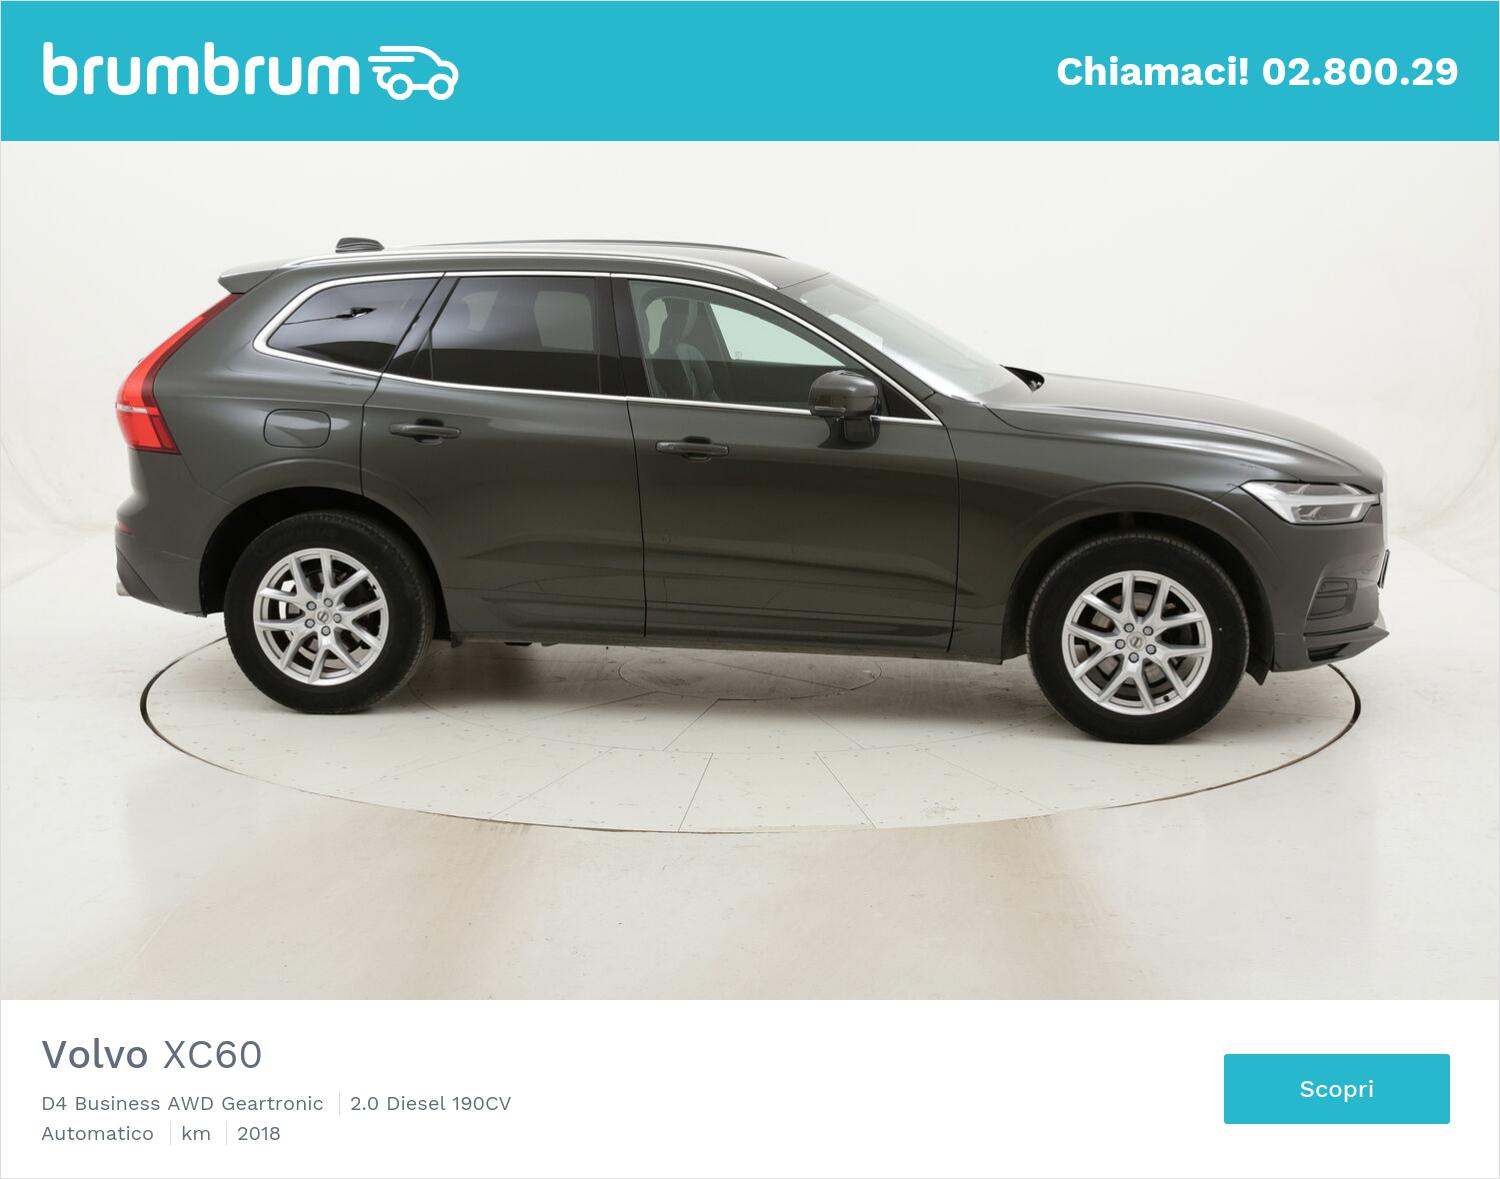 Volvo XC60 D4 Business AWD Geartronic usata del 2018 con 76.972 km | brumbrum